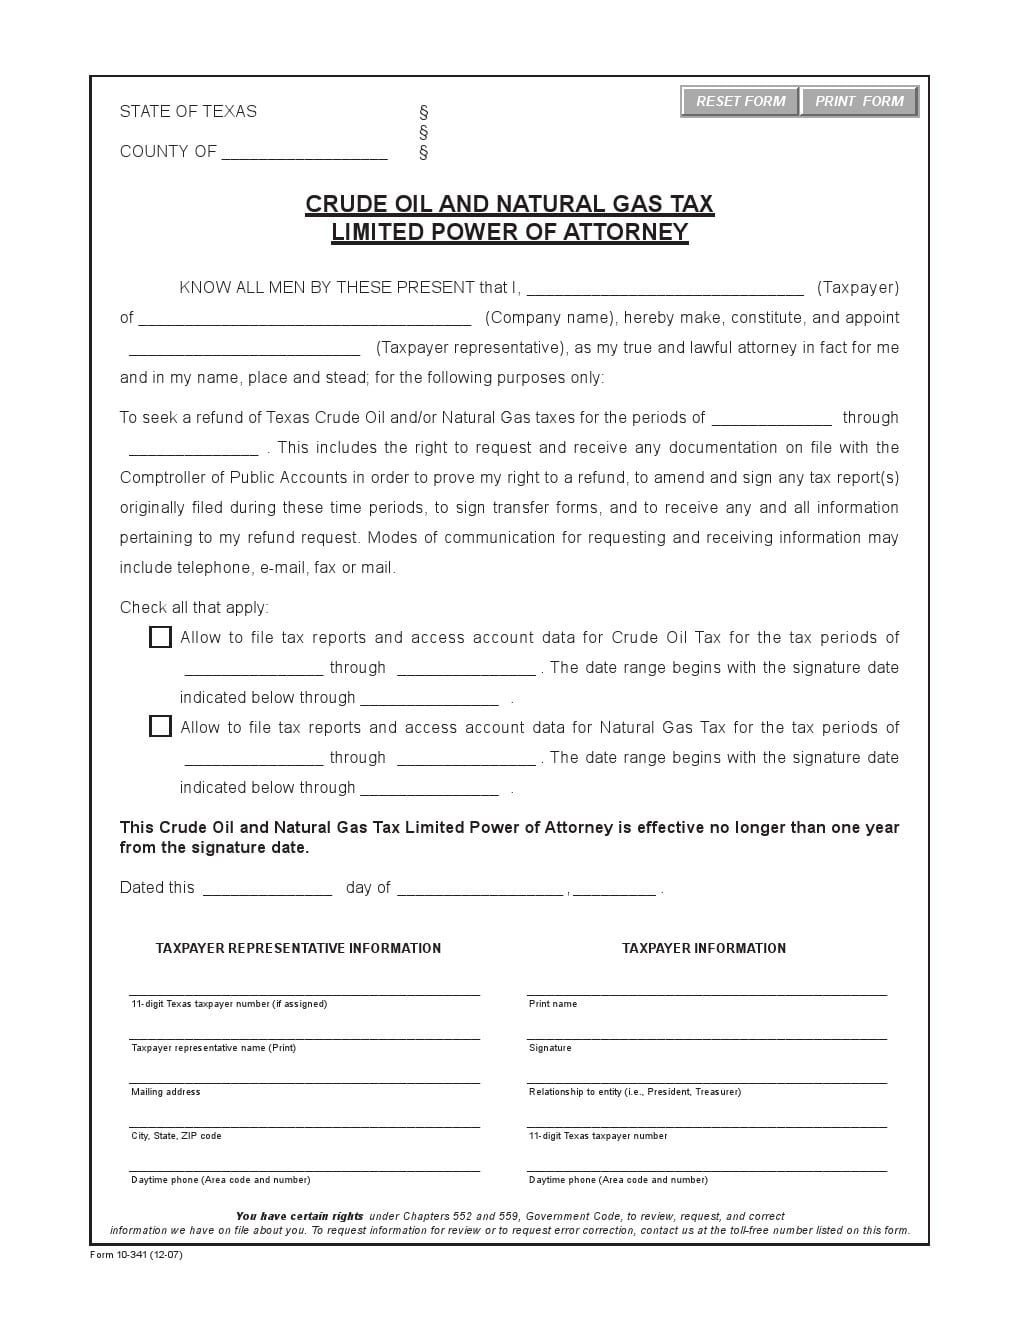 free-texas-crude-oil-limited-power-of-attorney-form-adobe-pdf-word